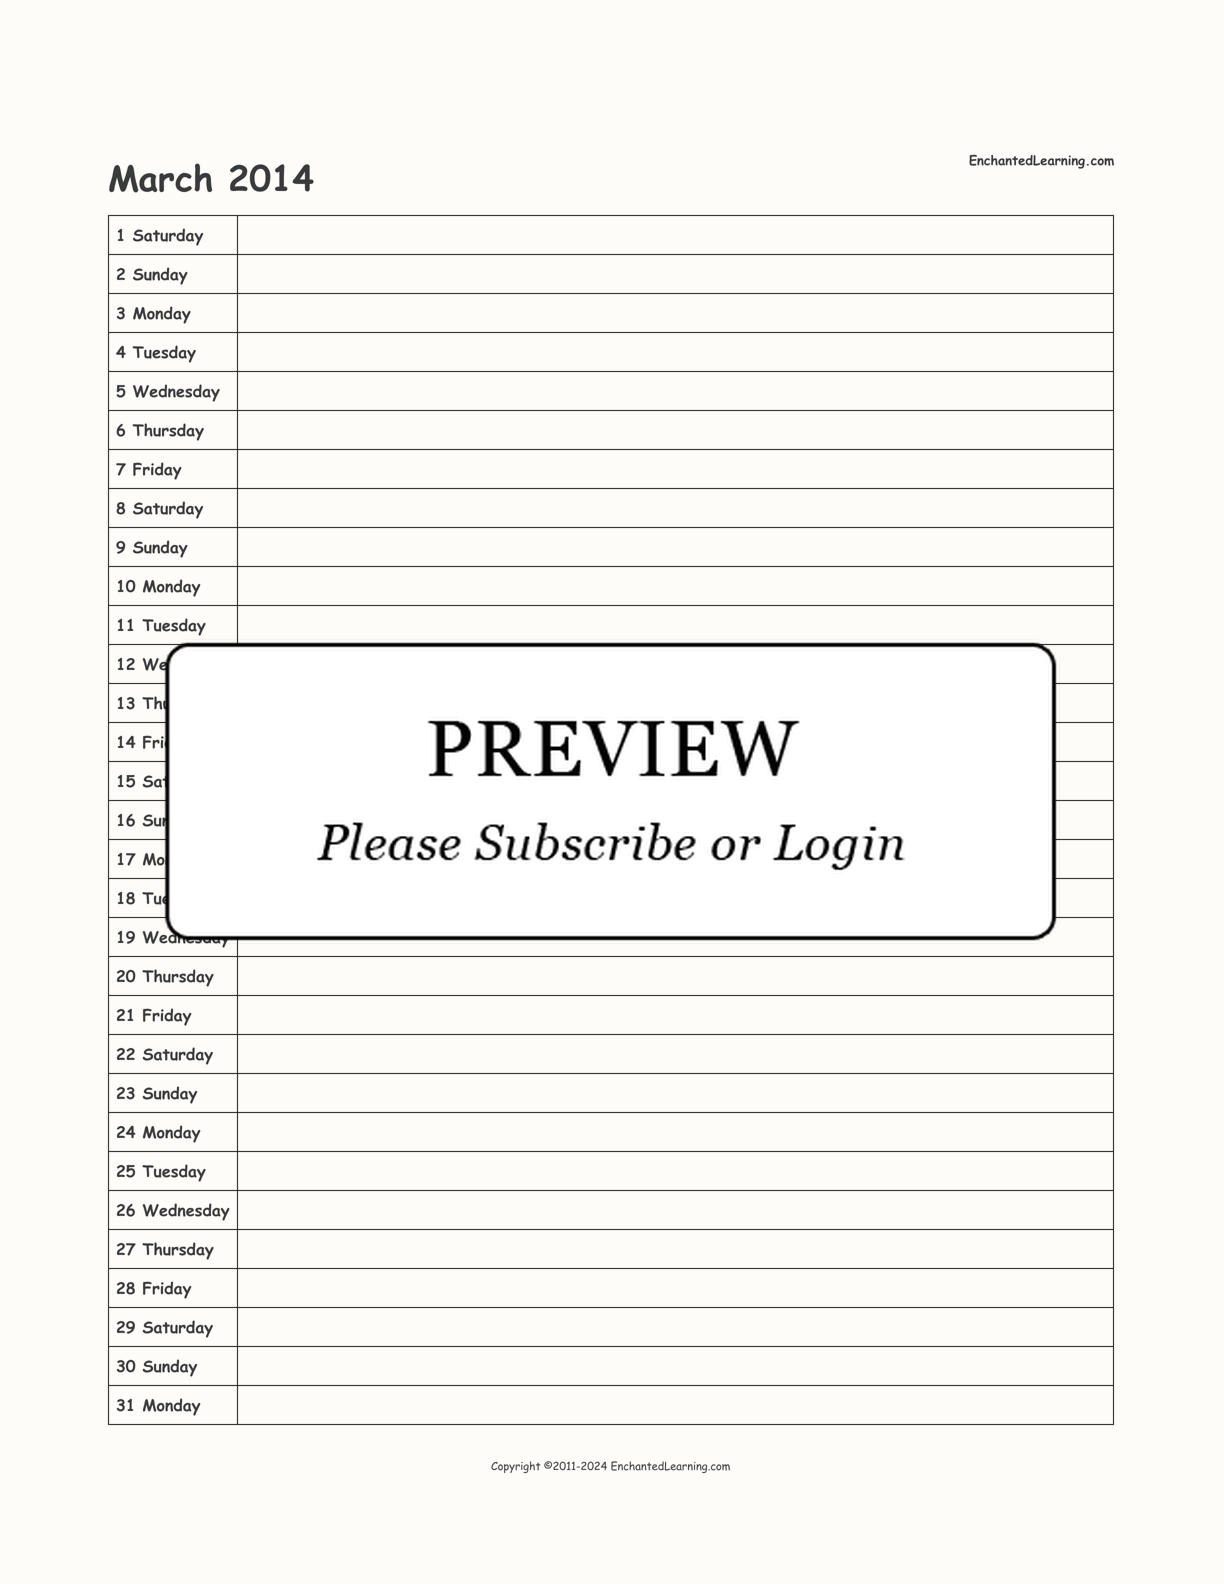 2014 Scheduling Calendar interactive printout page 3